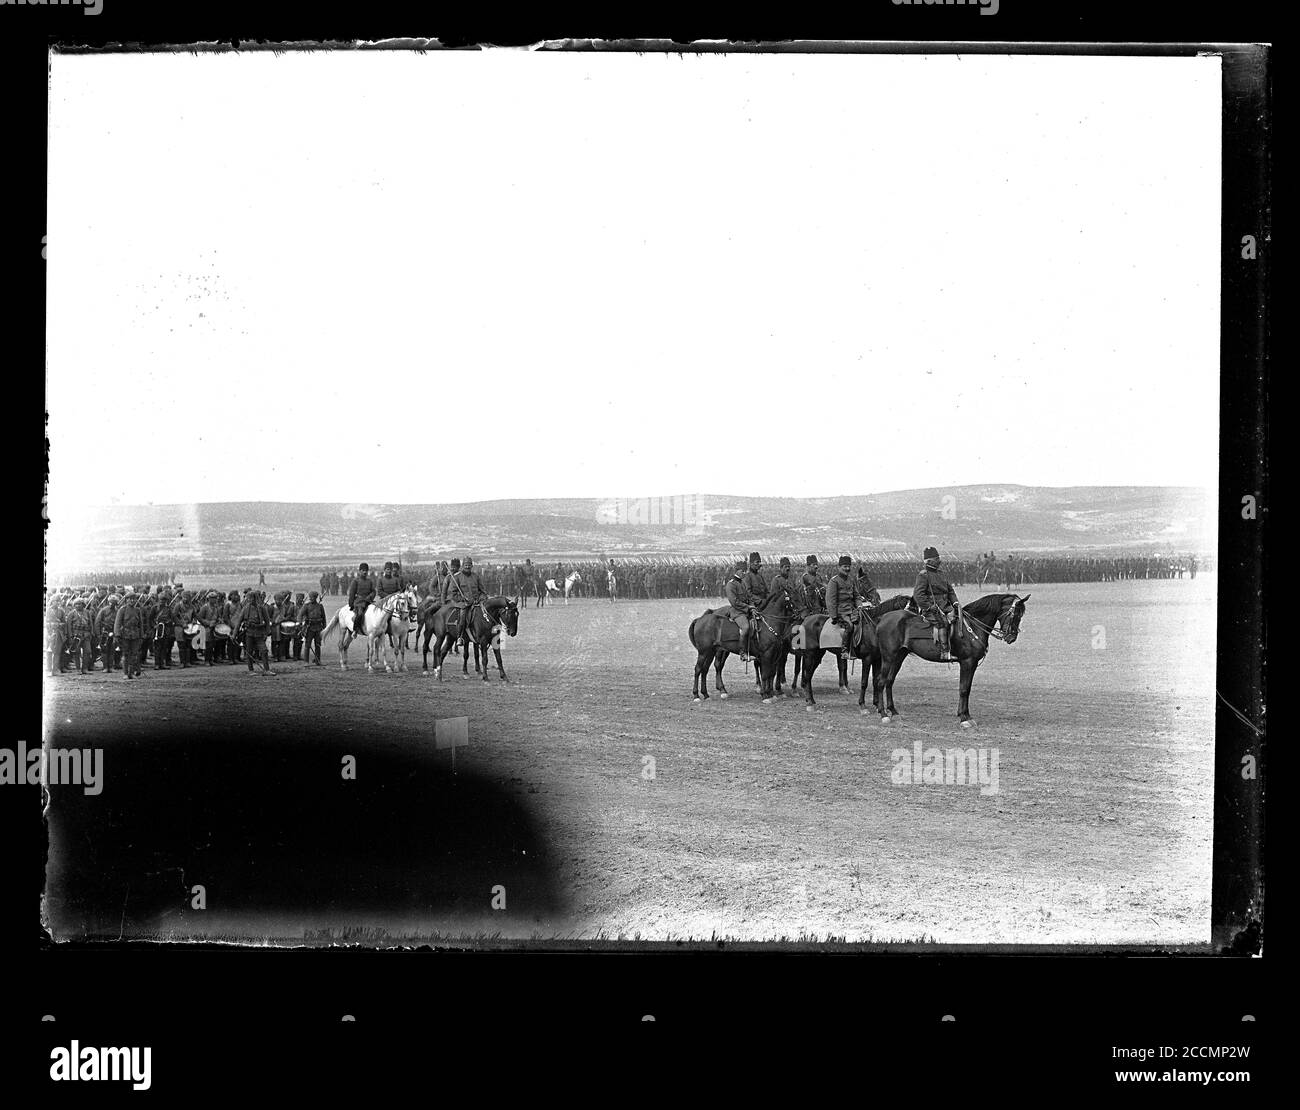 Ottoman infantry preparing for parade with German General Field Marshal Colmar von der Goltz on horseback. Goltz is accompanied by a group of four Turkish and one German officer. Soldiers in the music formation on the left wear headwraps and puttees. Photograph on dry glass plate from the Herry W. Schaefer collection, around 1913. Stock Photo